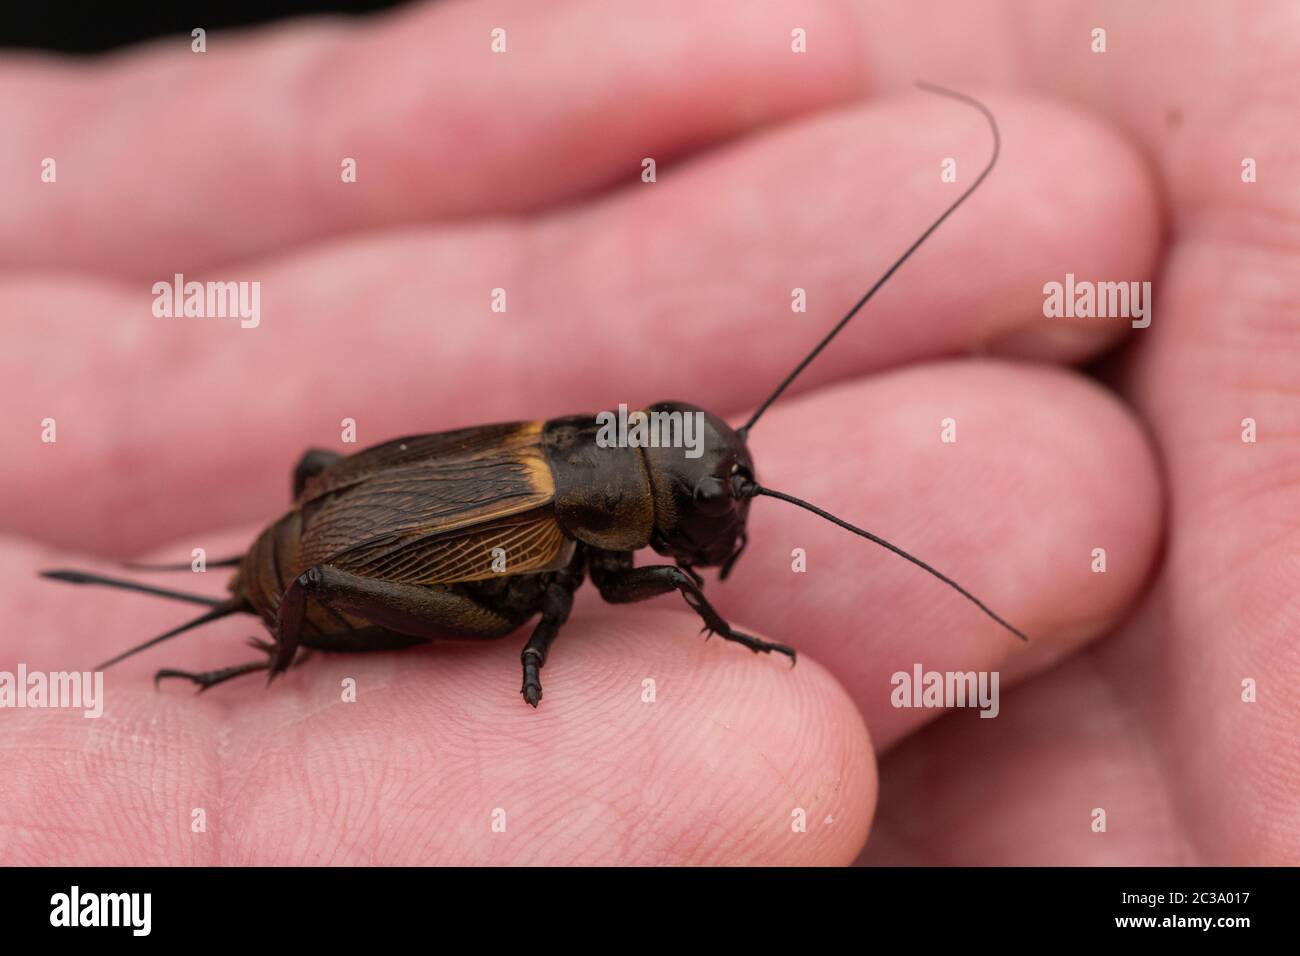 Close-uo of a field cricket on human hand Stock Photo